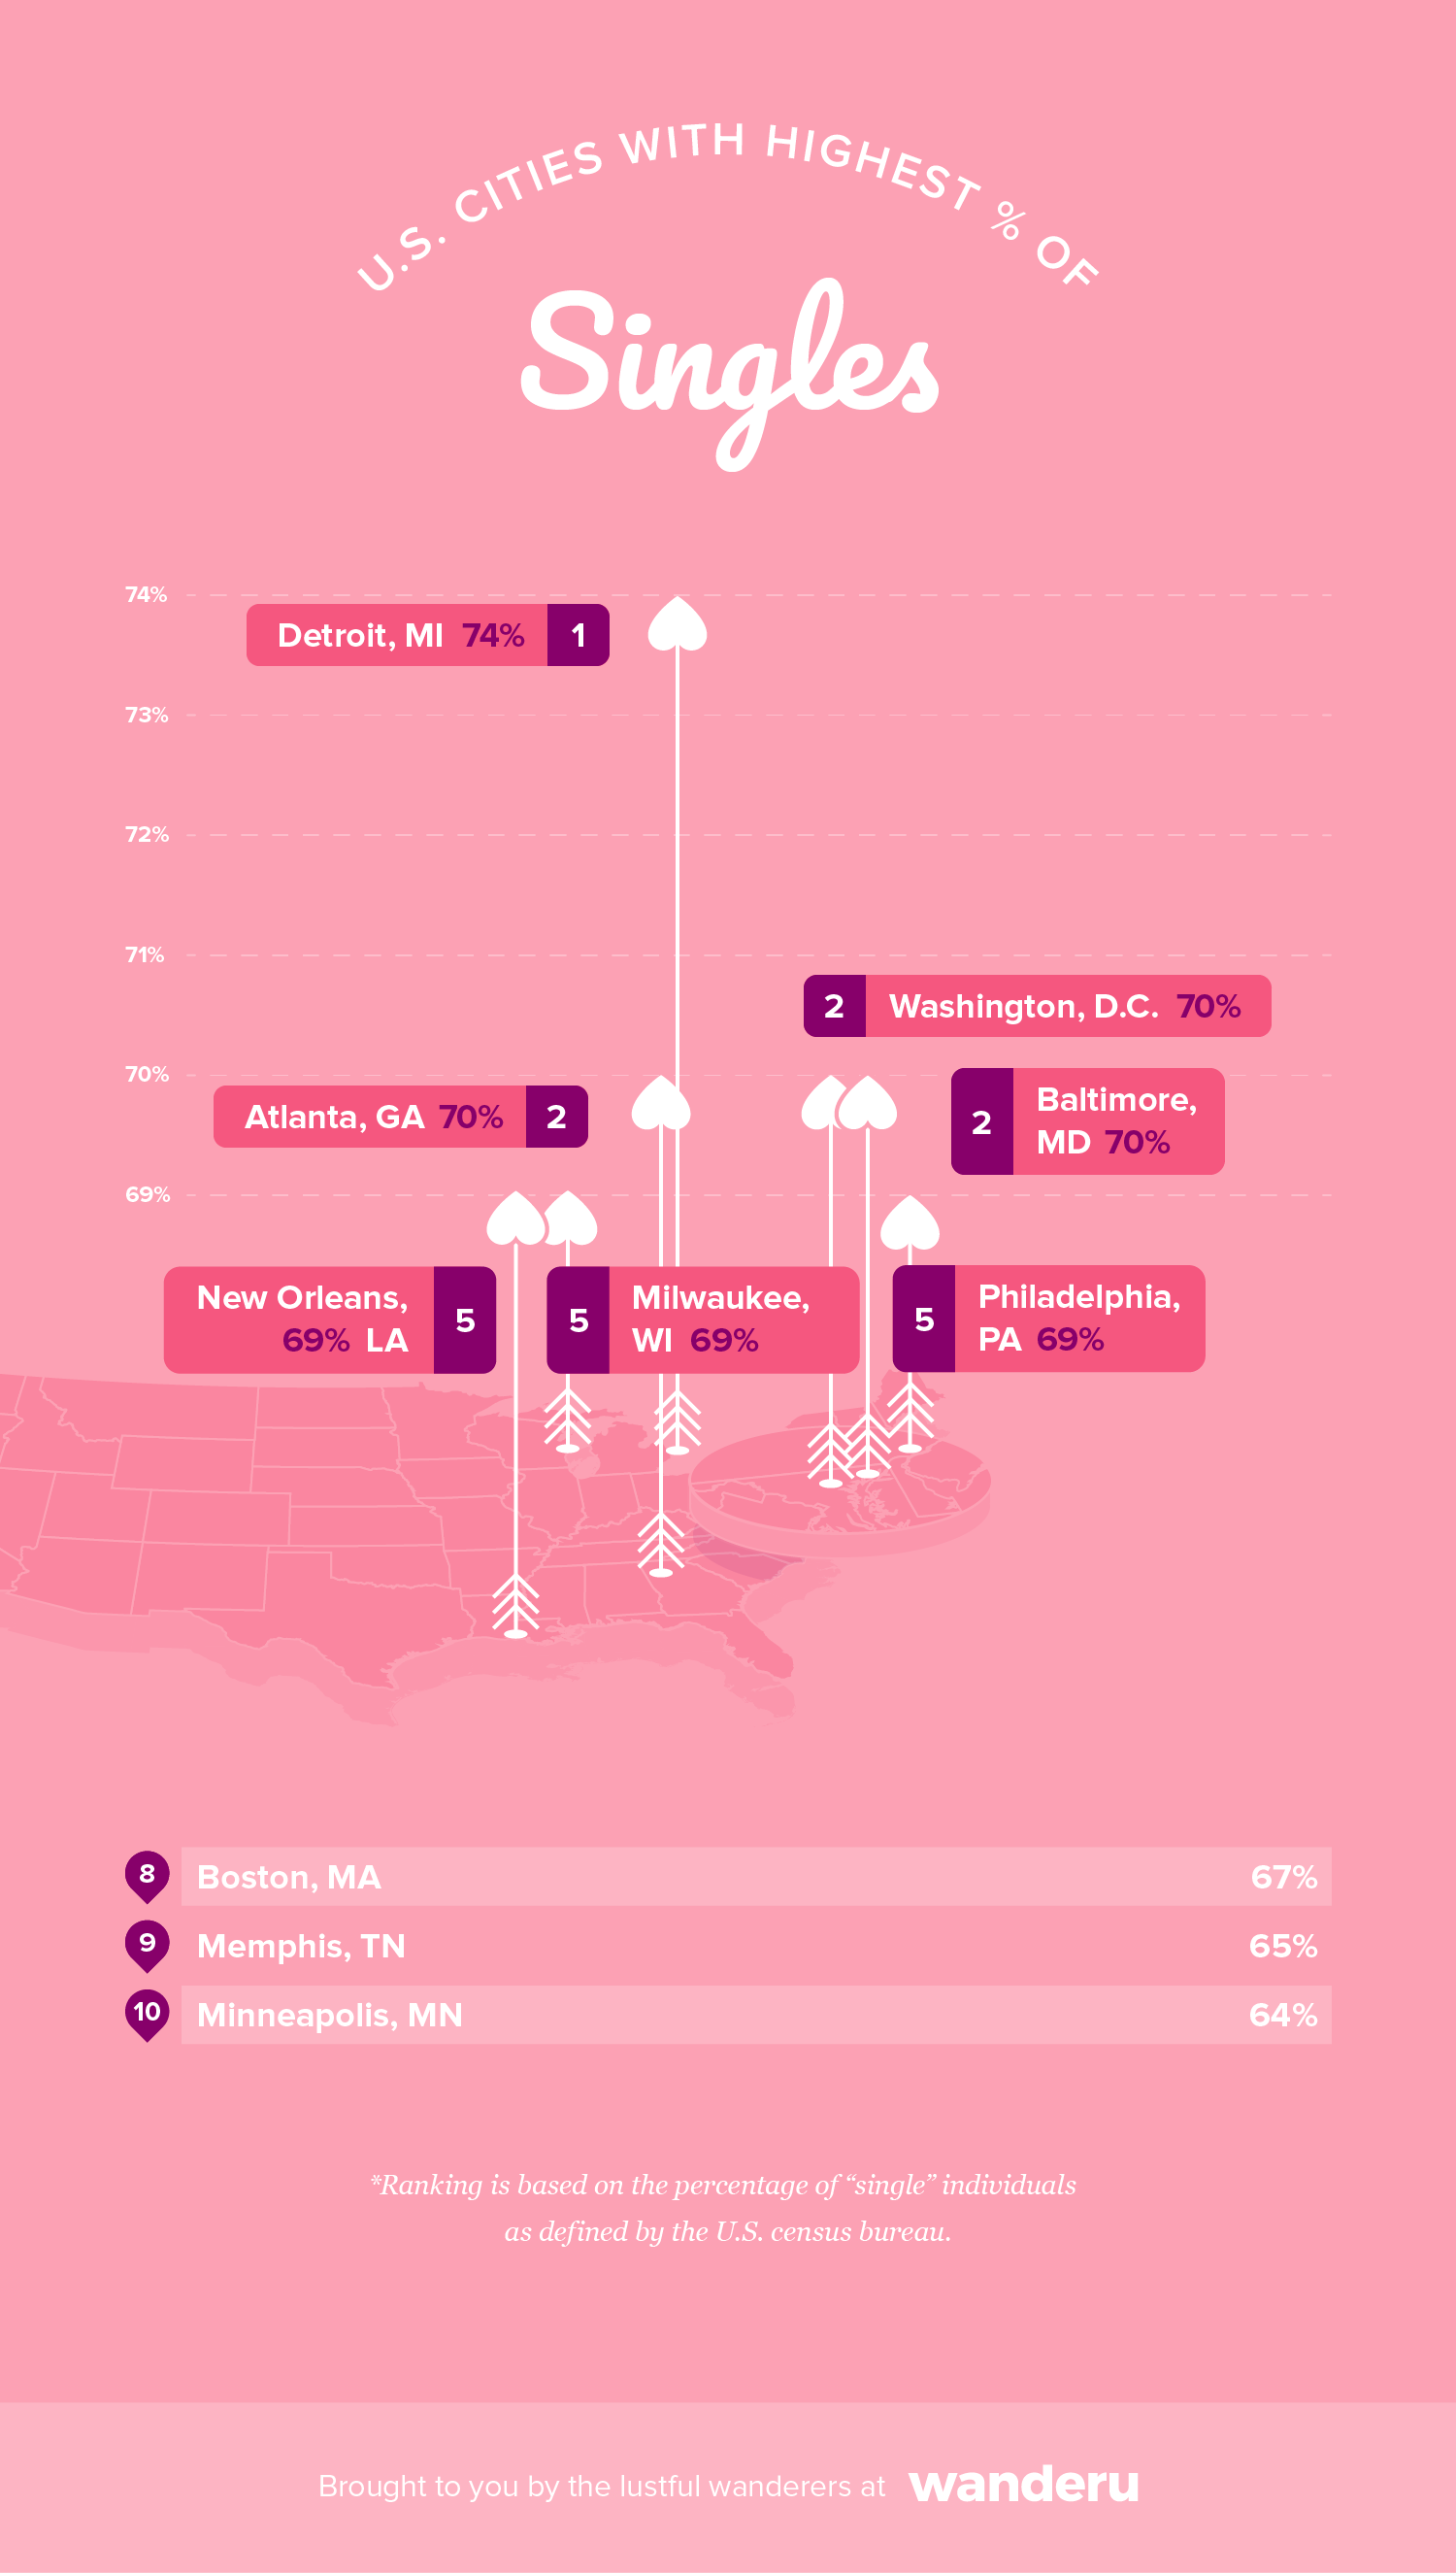 Graphic shows the top five cities with the highest percentage of singles in the U.S.